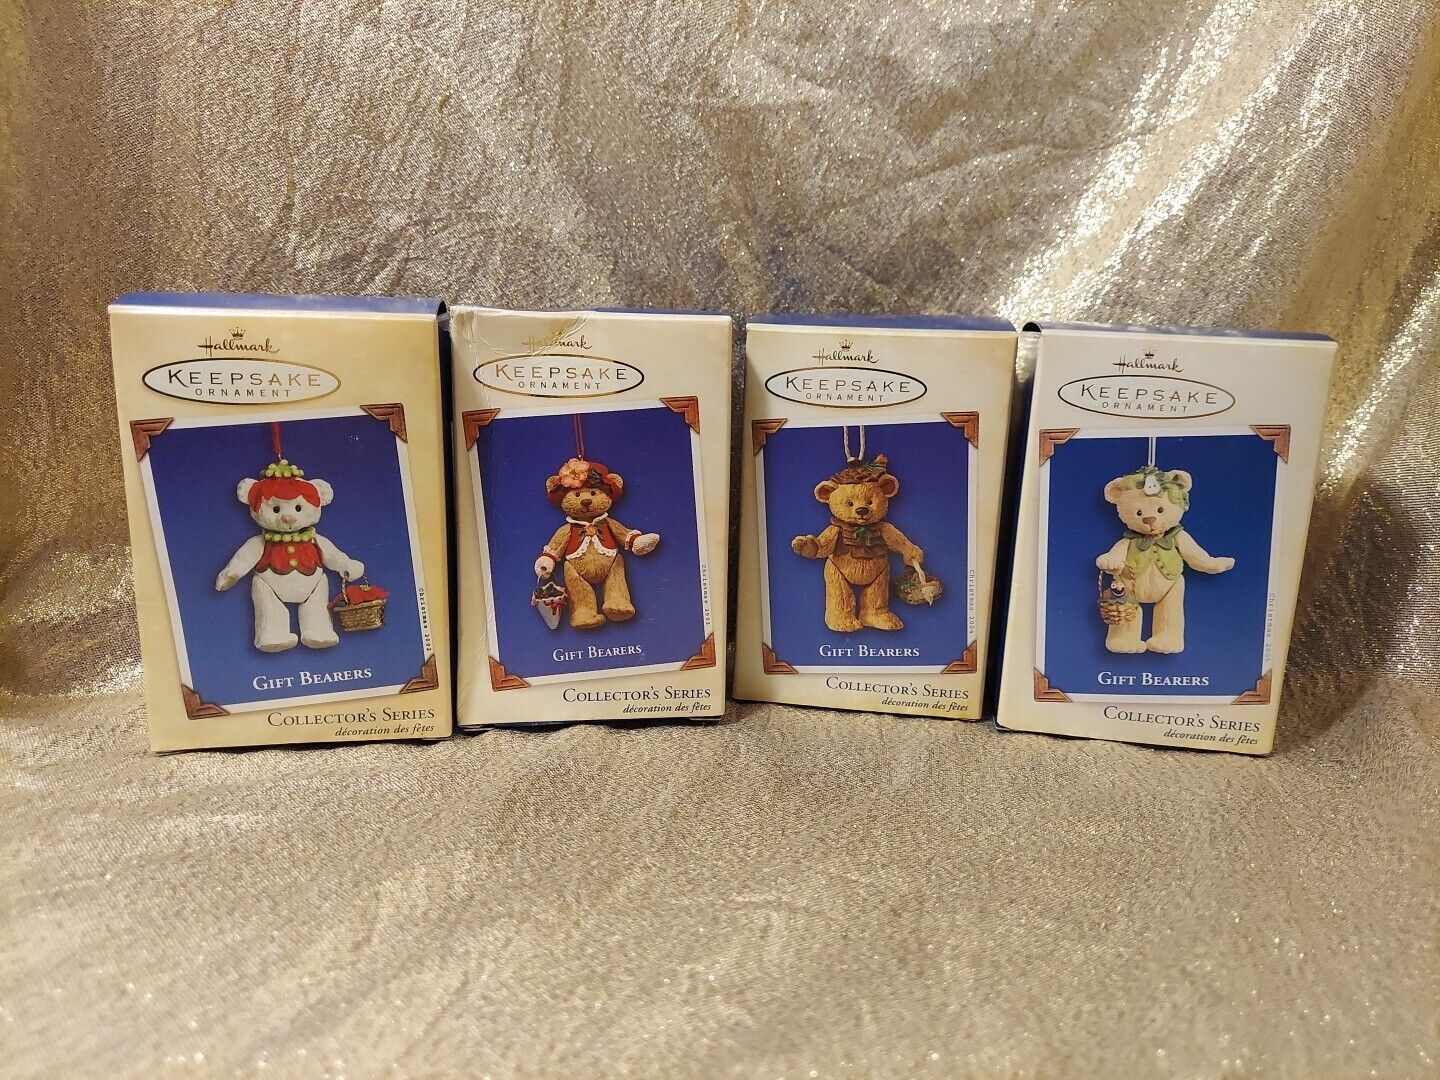 Lot Of 4 Hallmark Gift Bearers 02, 03, 04,05, Jointed Porcelain Bear Ornaments